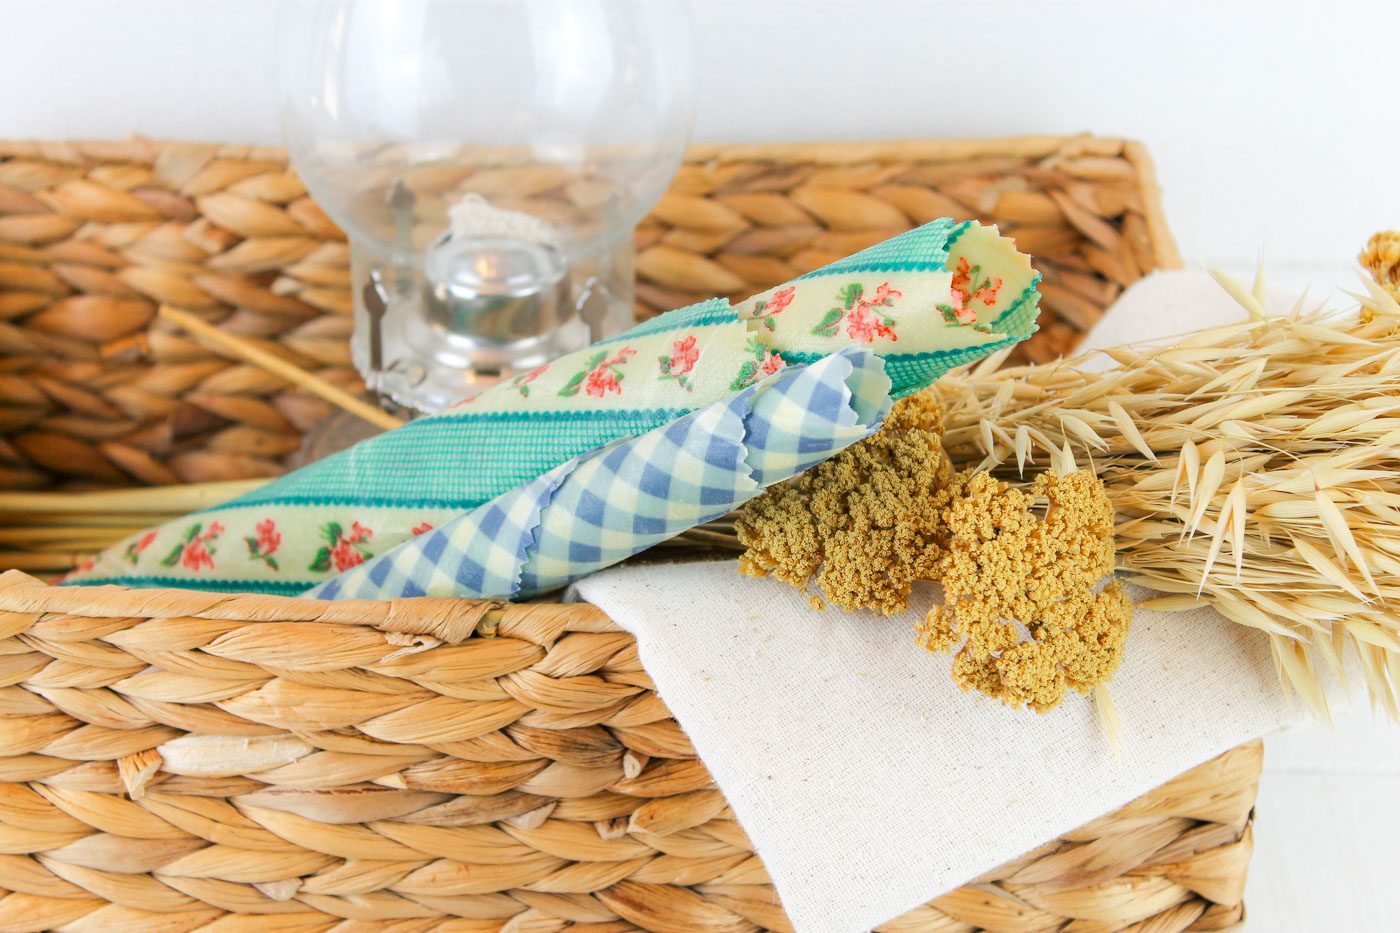 weaved basket full of beeswax wraps, dried natural, a piece of linen and an oil lamp